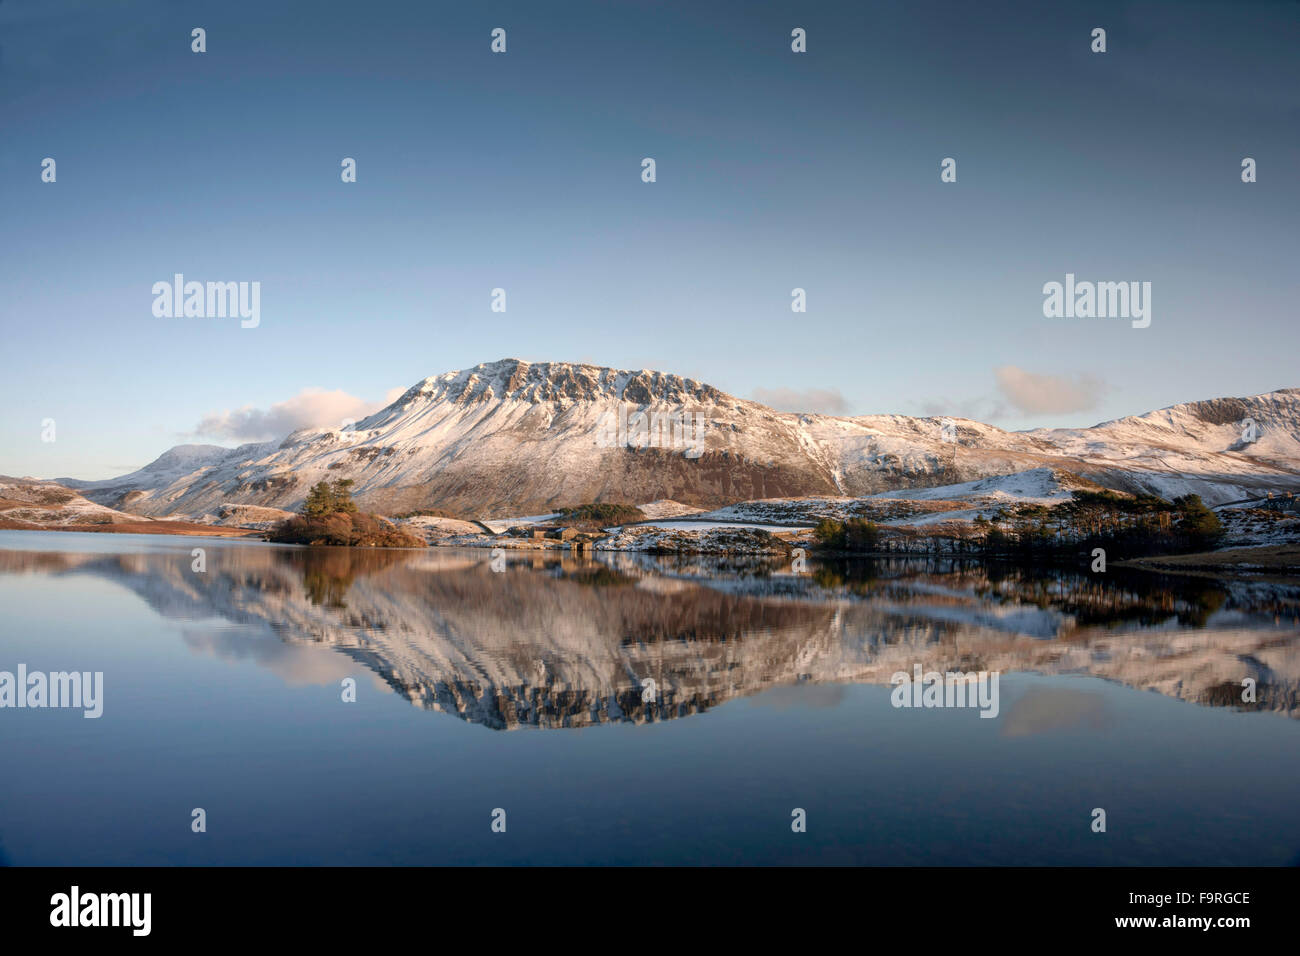 The winter snow covered slopes of the Cader Idris mountain range are reflected in the still water of Cregennen Lakes. Stock Photo